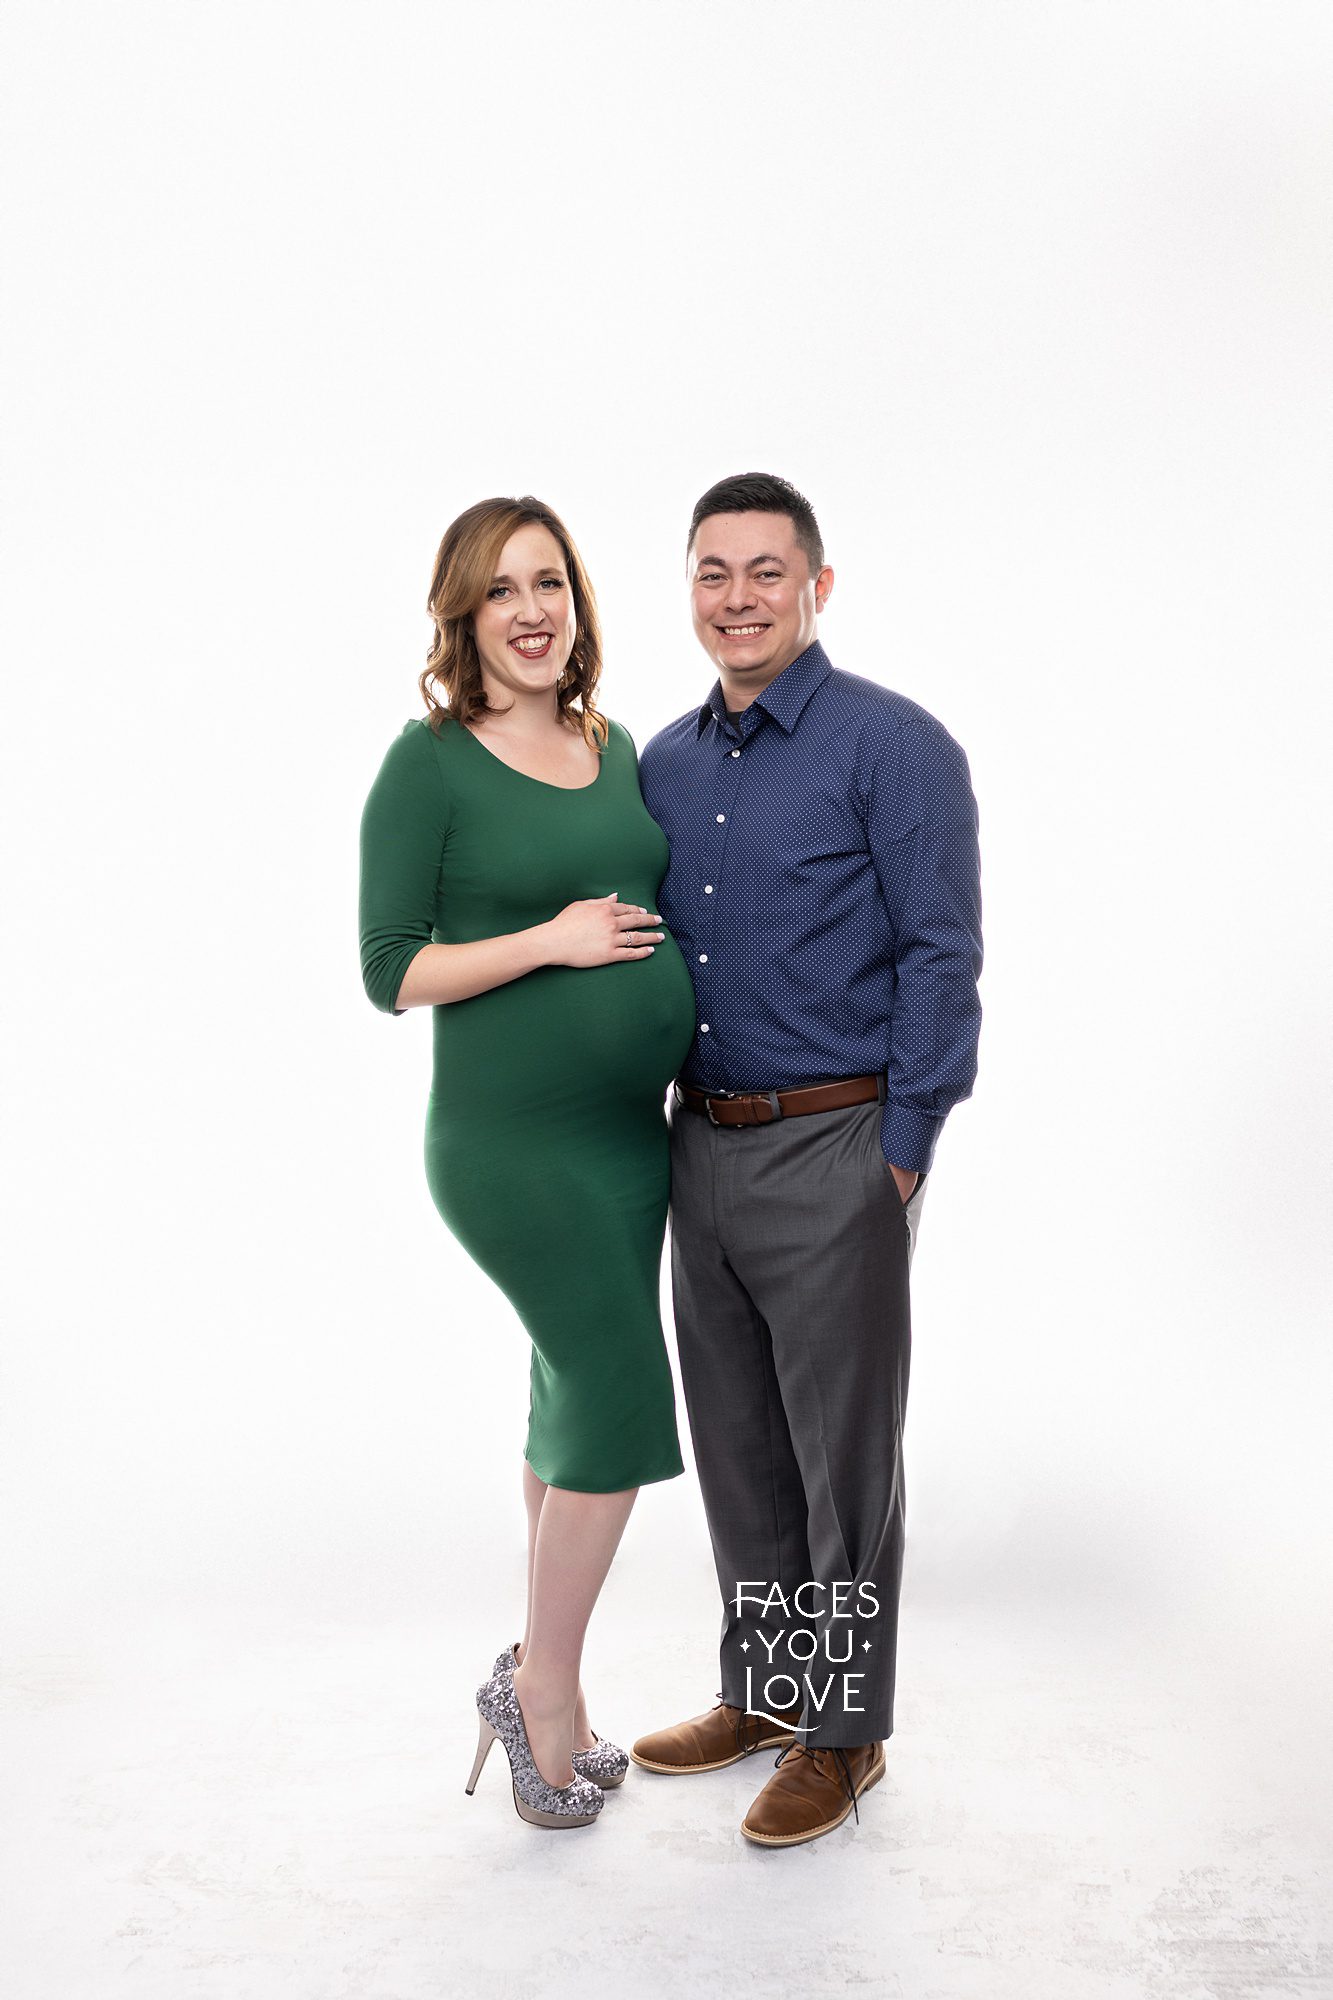 Maternity couple pose on high-key lighting, at Faces You Love studio in Kansas City. Pregnant mom is wearing an emerald green, cocktail length dress and dad is posed next to her in slacks and a button down shirt.